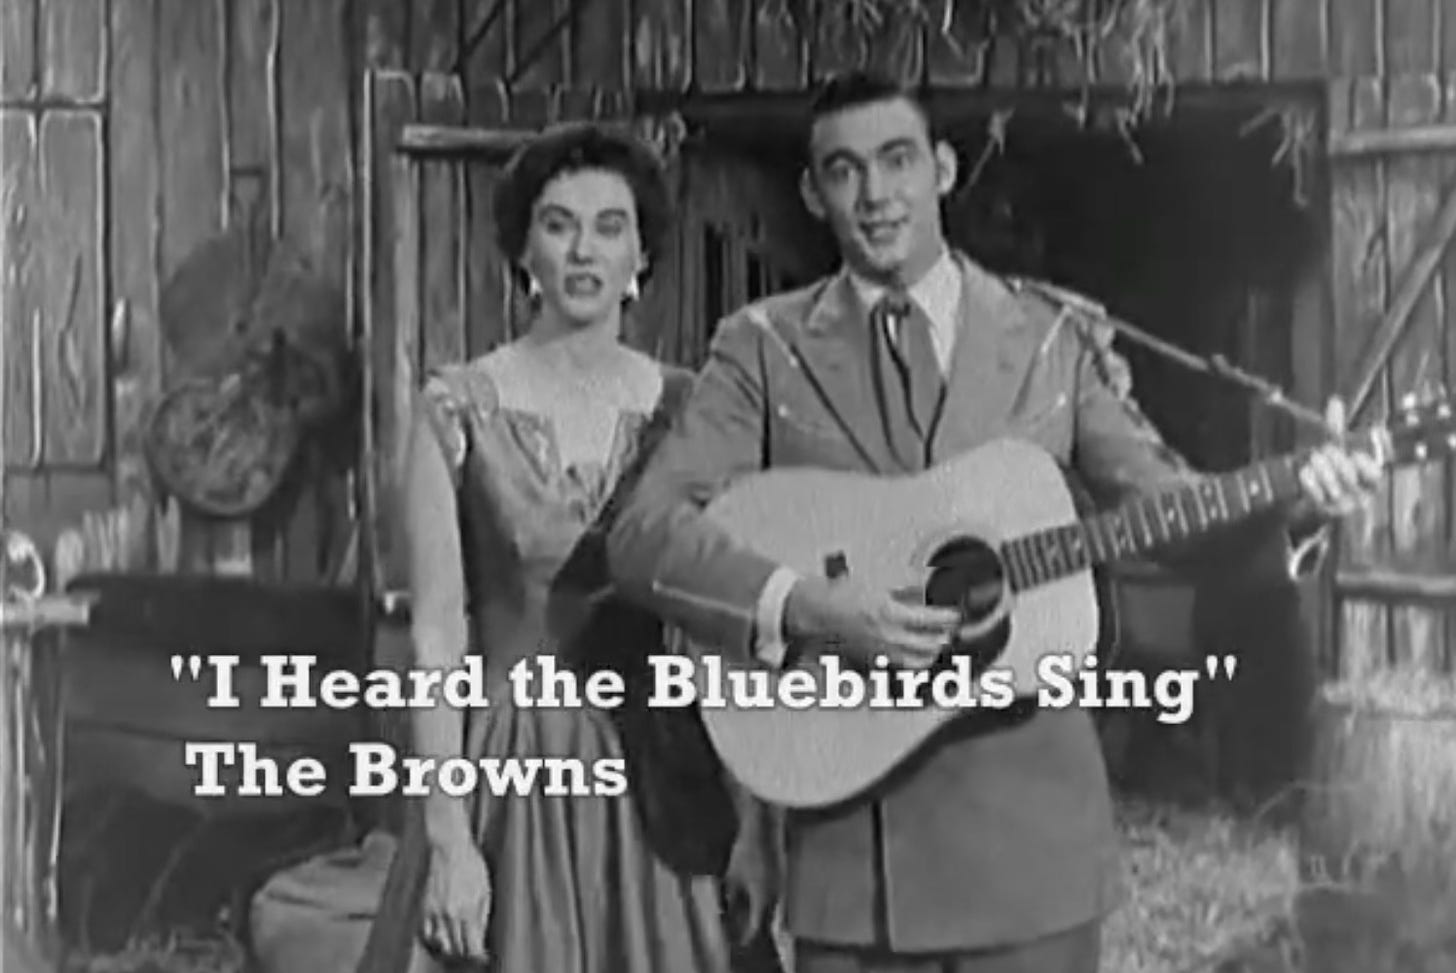 The Browns singing the song I Heard the Bluebirds Sing in front of an old homestead building. Maxine Brown is on Jim's left as he strums a guitar